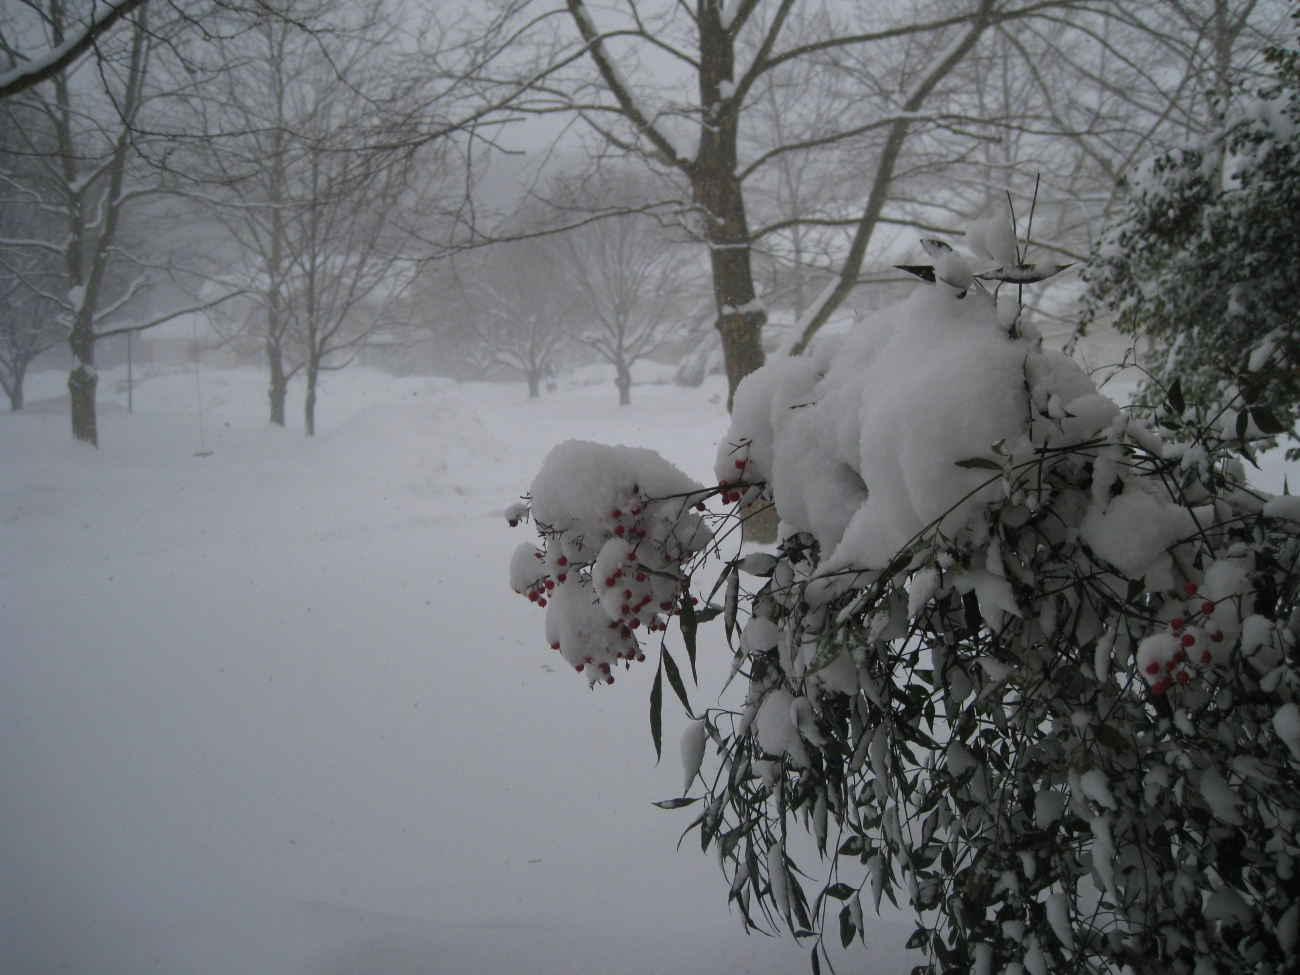 The third great storm of the winter of 2009/2010